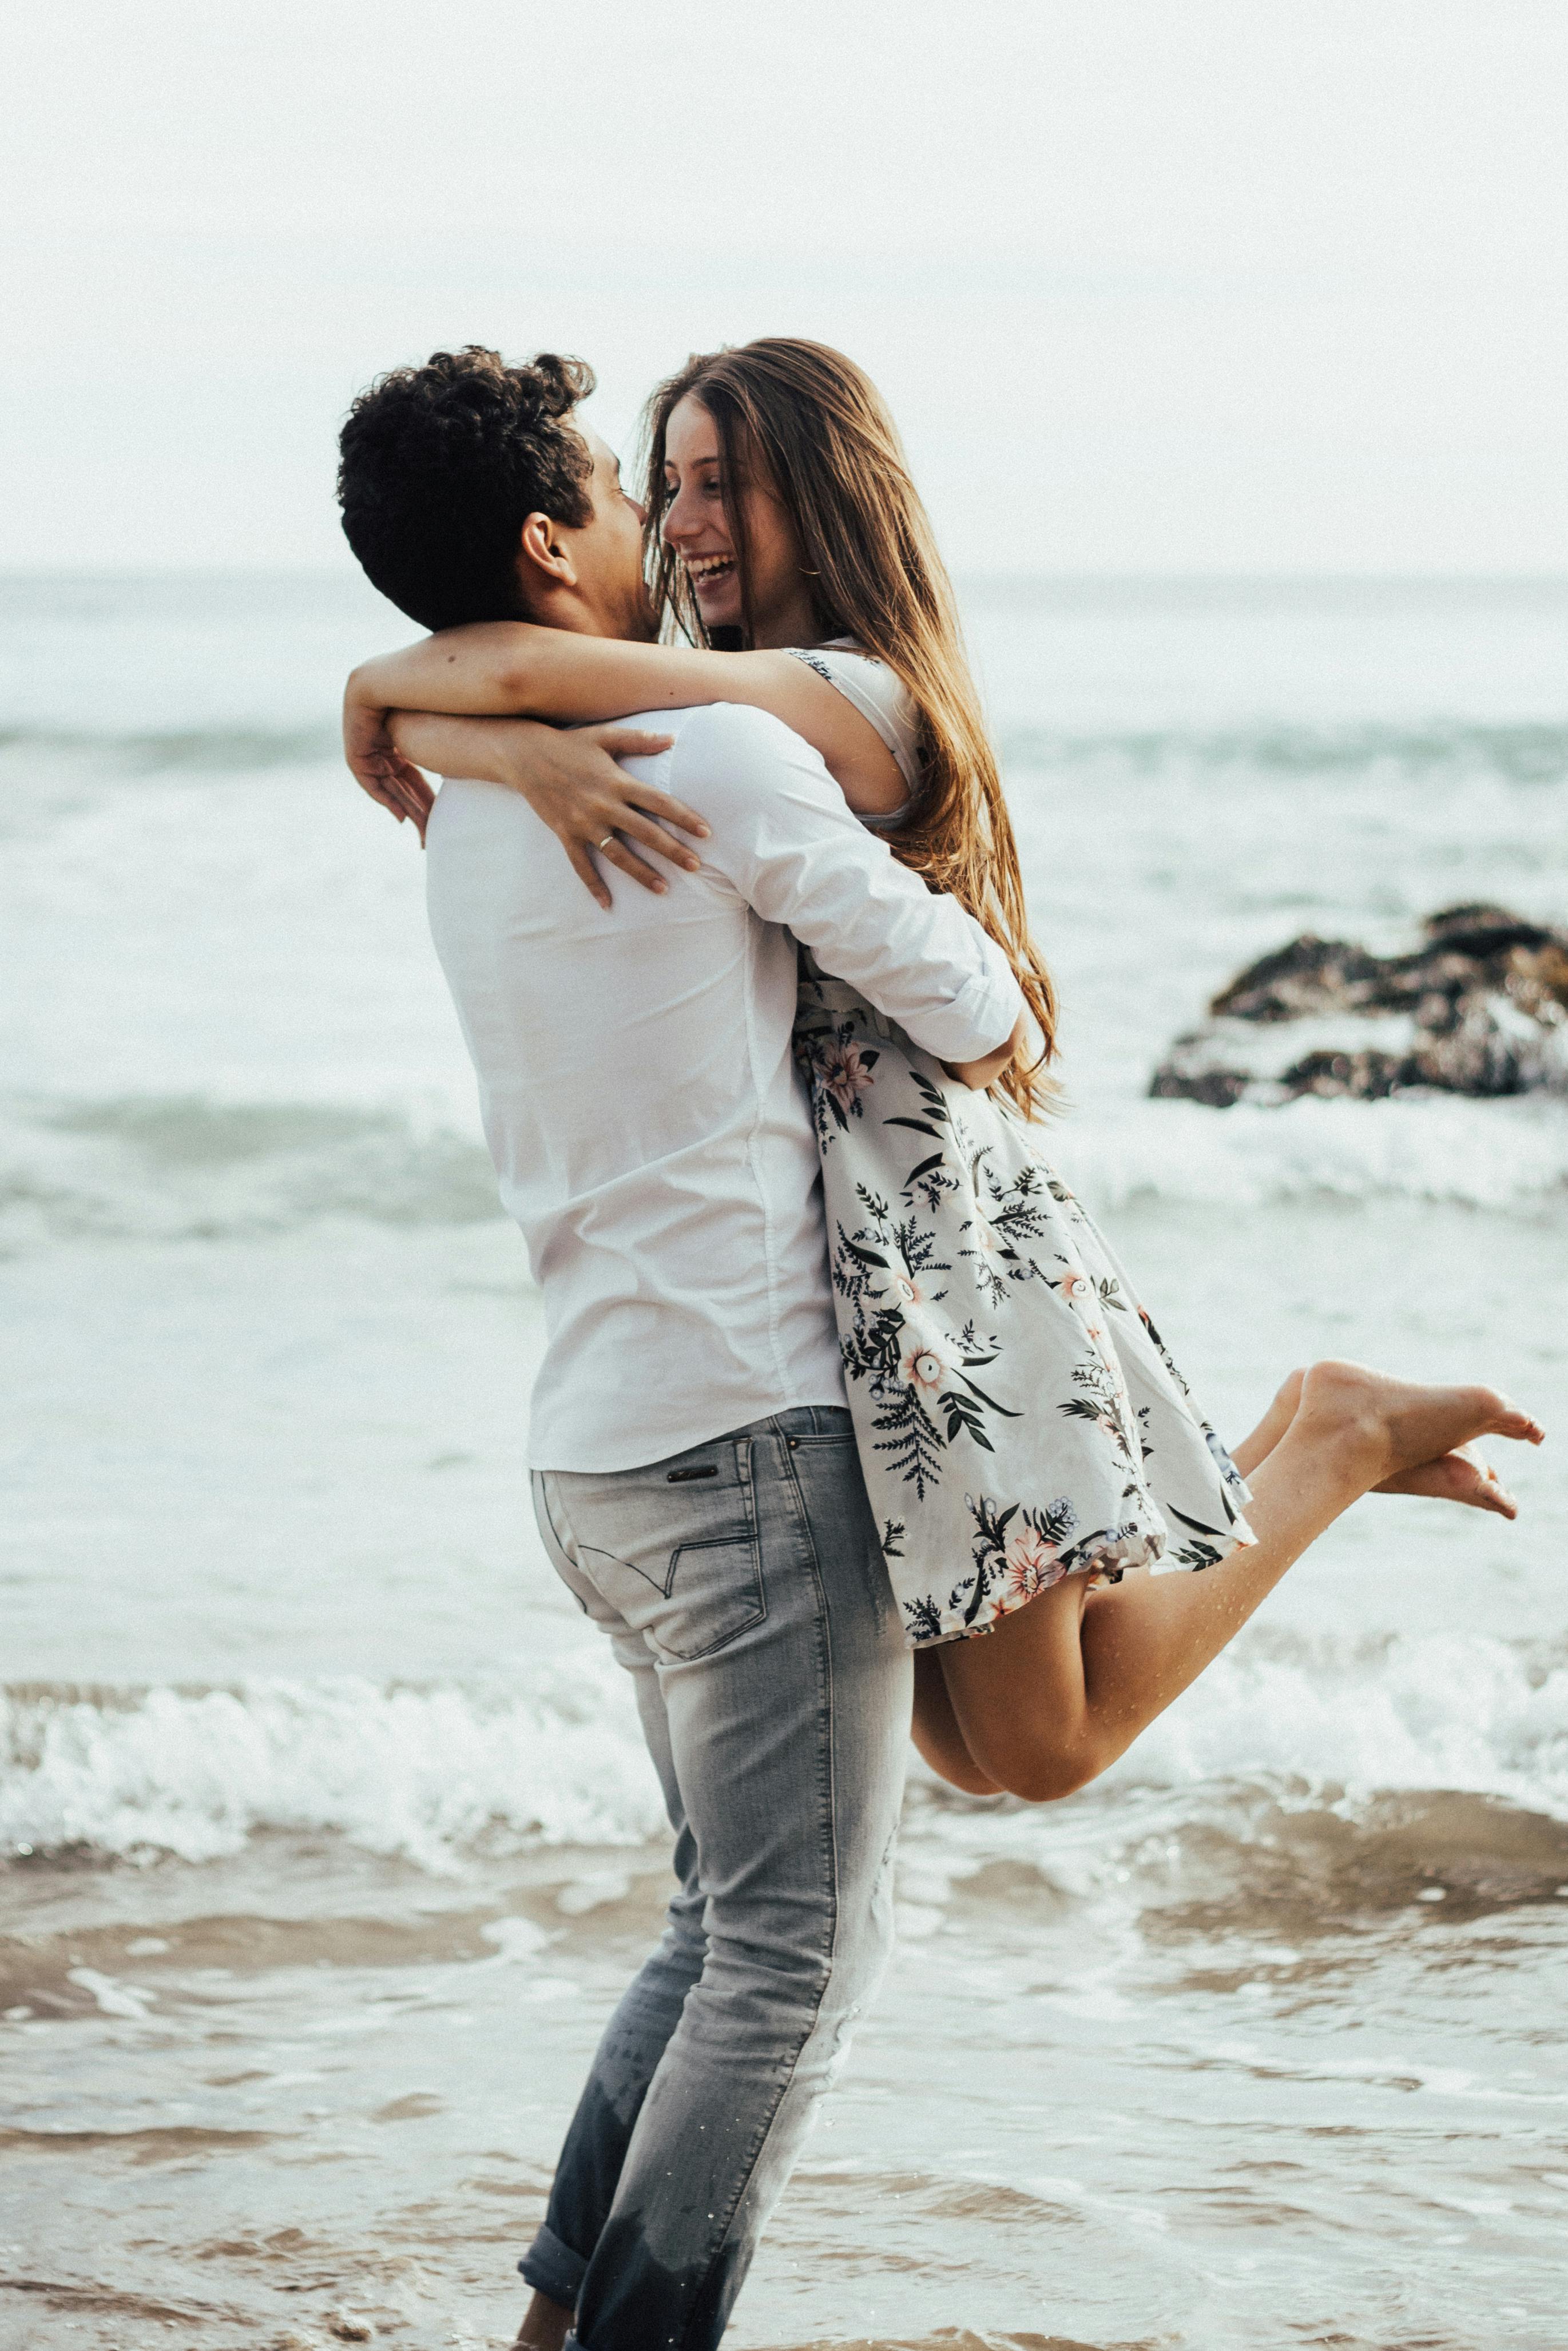 Couple Hugging Photos, Download The BEST Free Couple Hugging Stock Photos &  HD Images